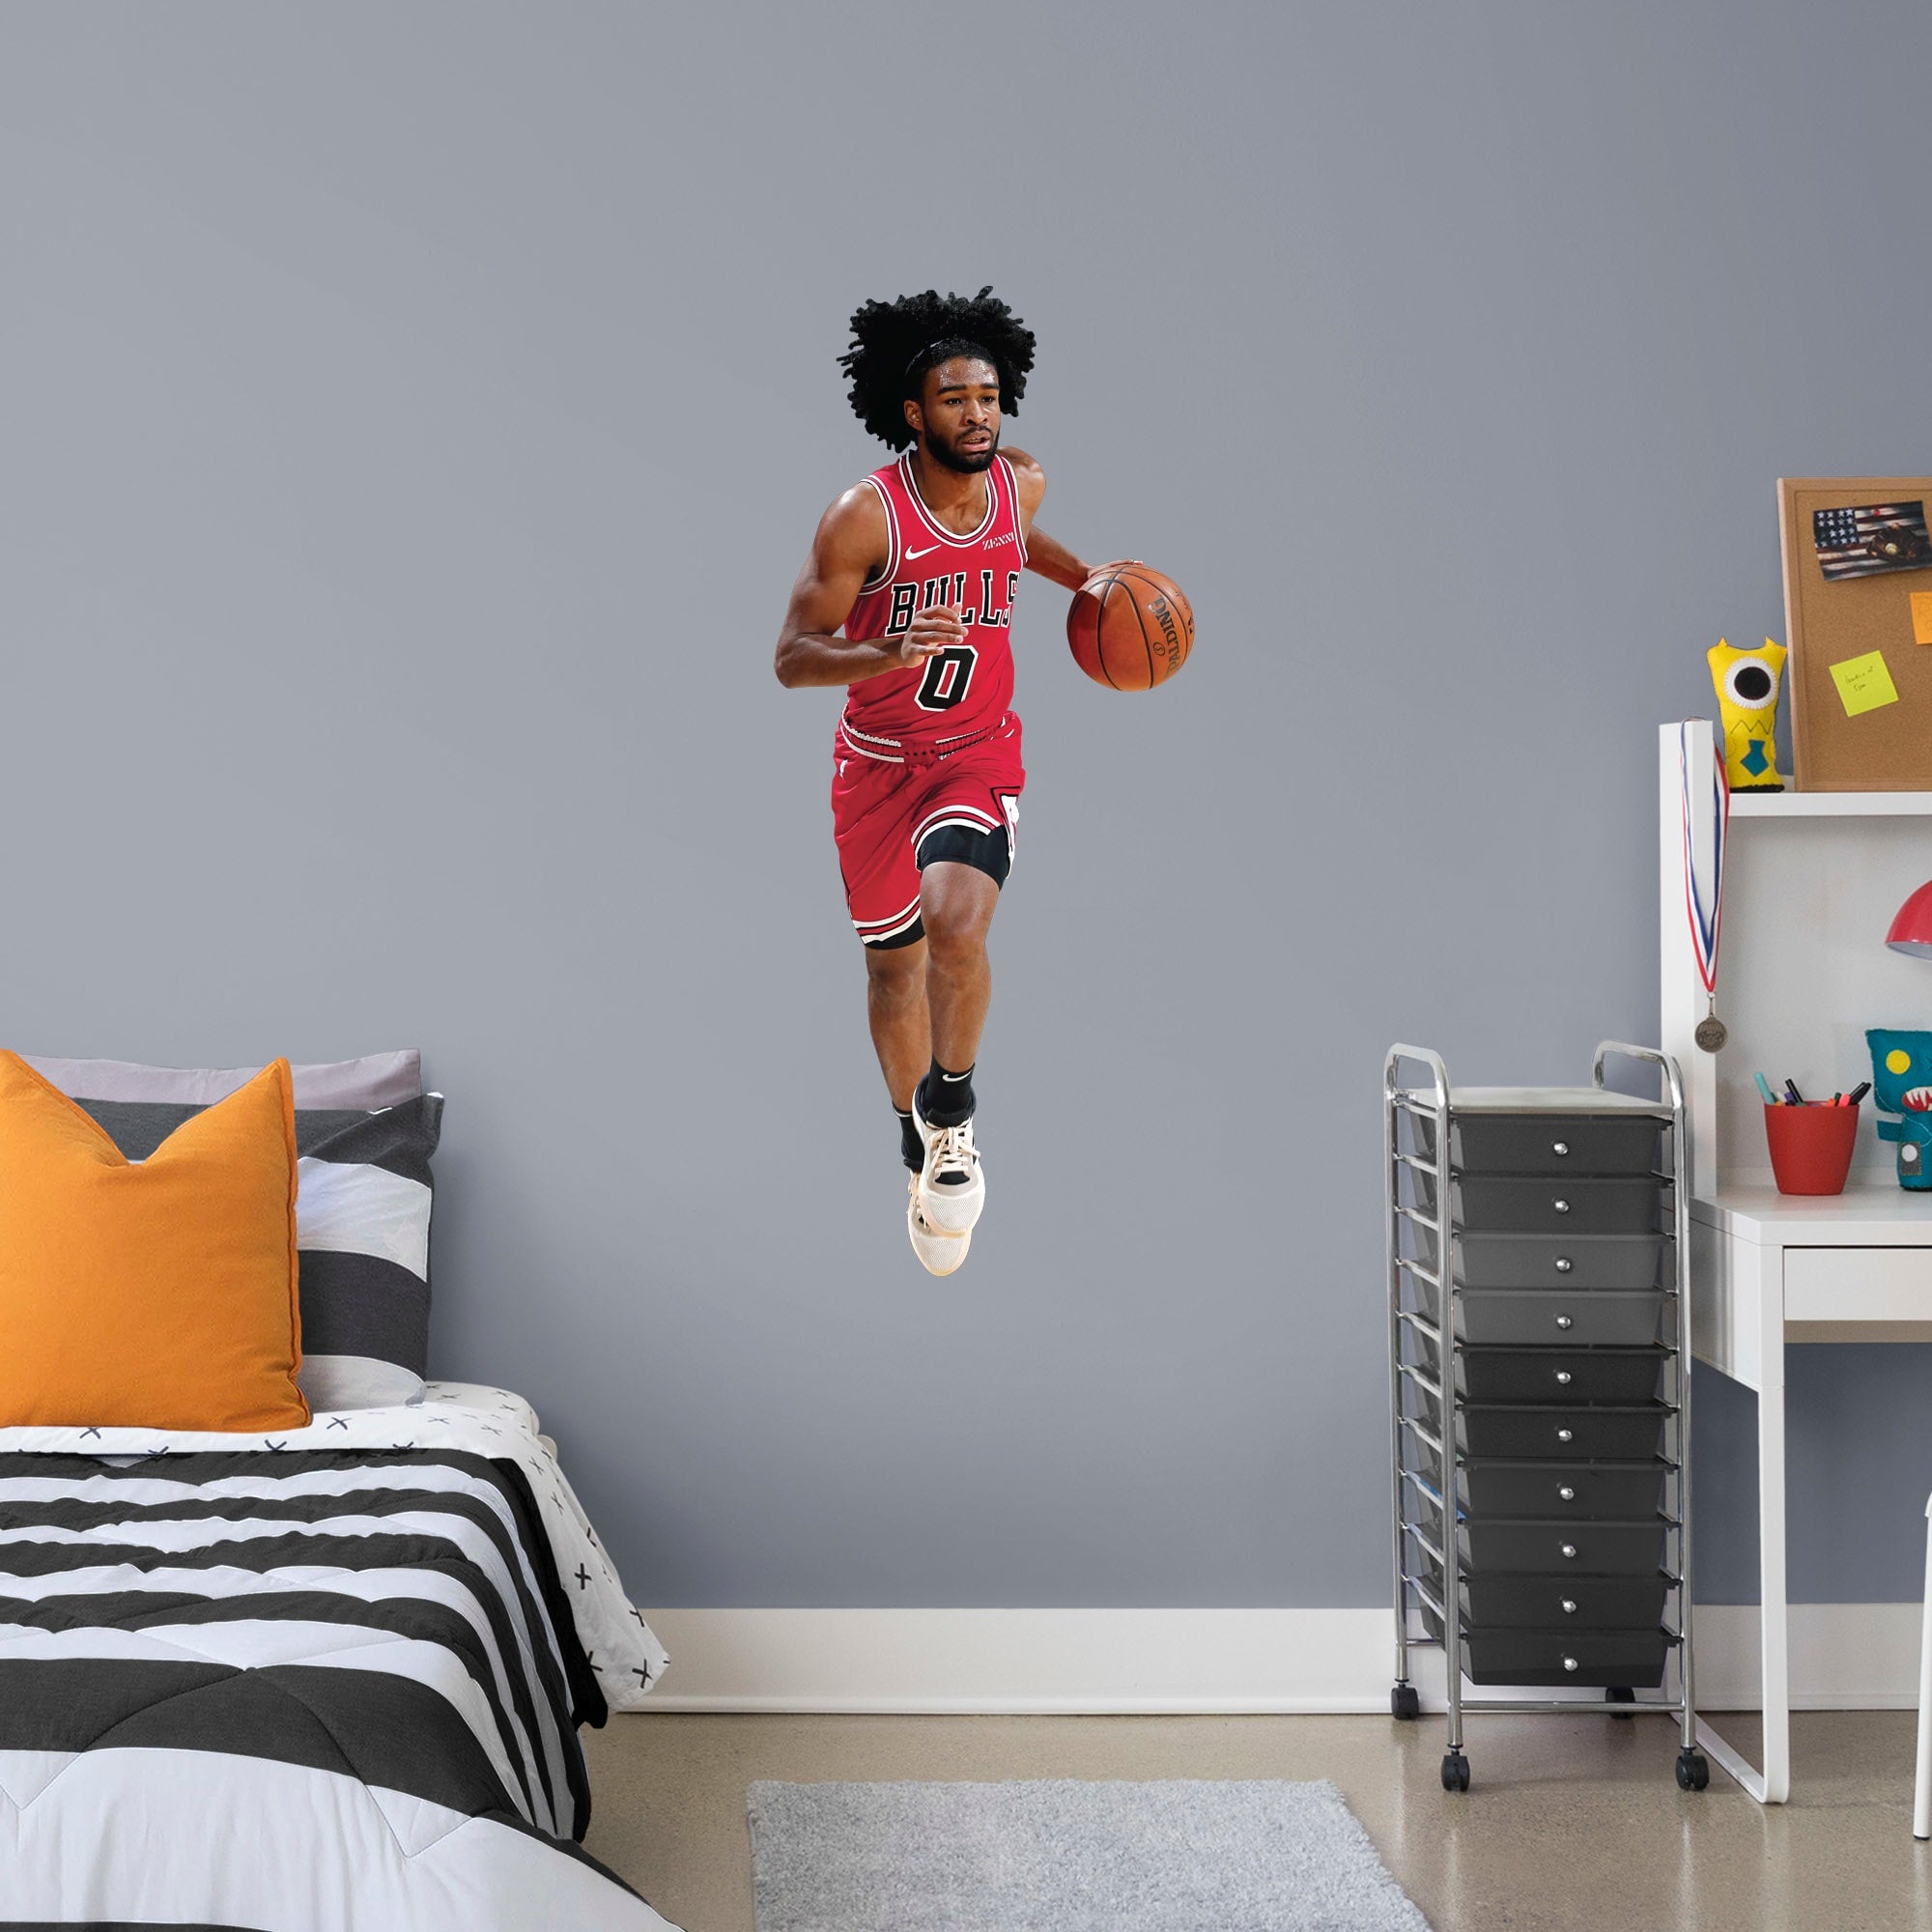 Coby White for Chicago Bulls - Officially Licensed NBA Removable Wall Decal Giant Athlete + 2 Decals (22"W x 51"H) by Fathead |